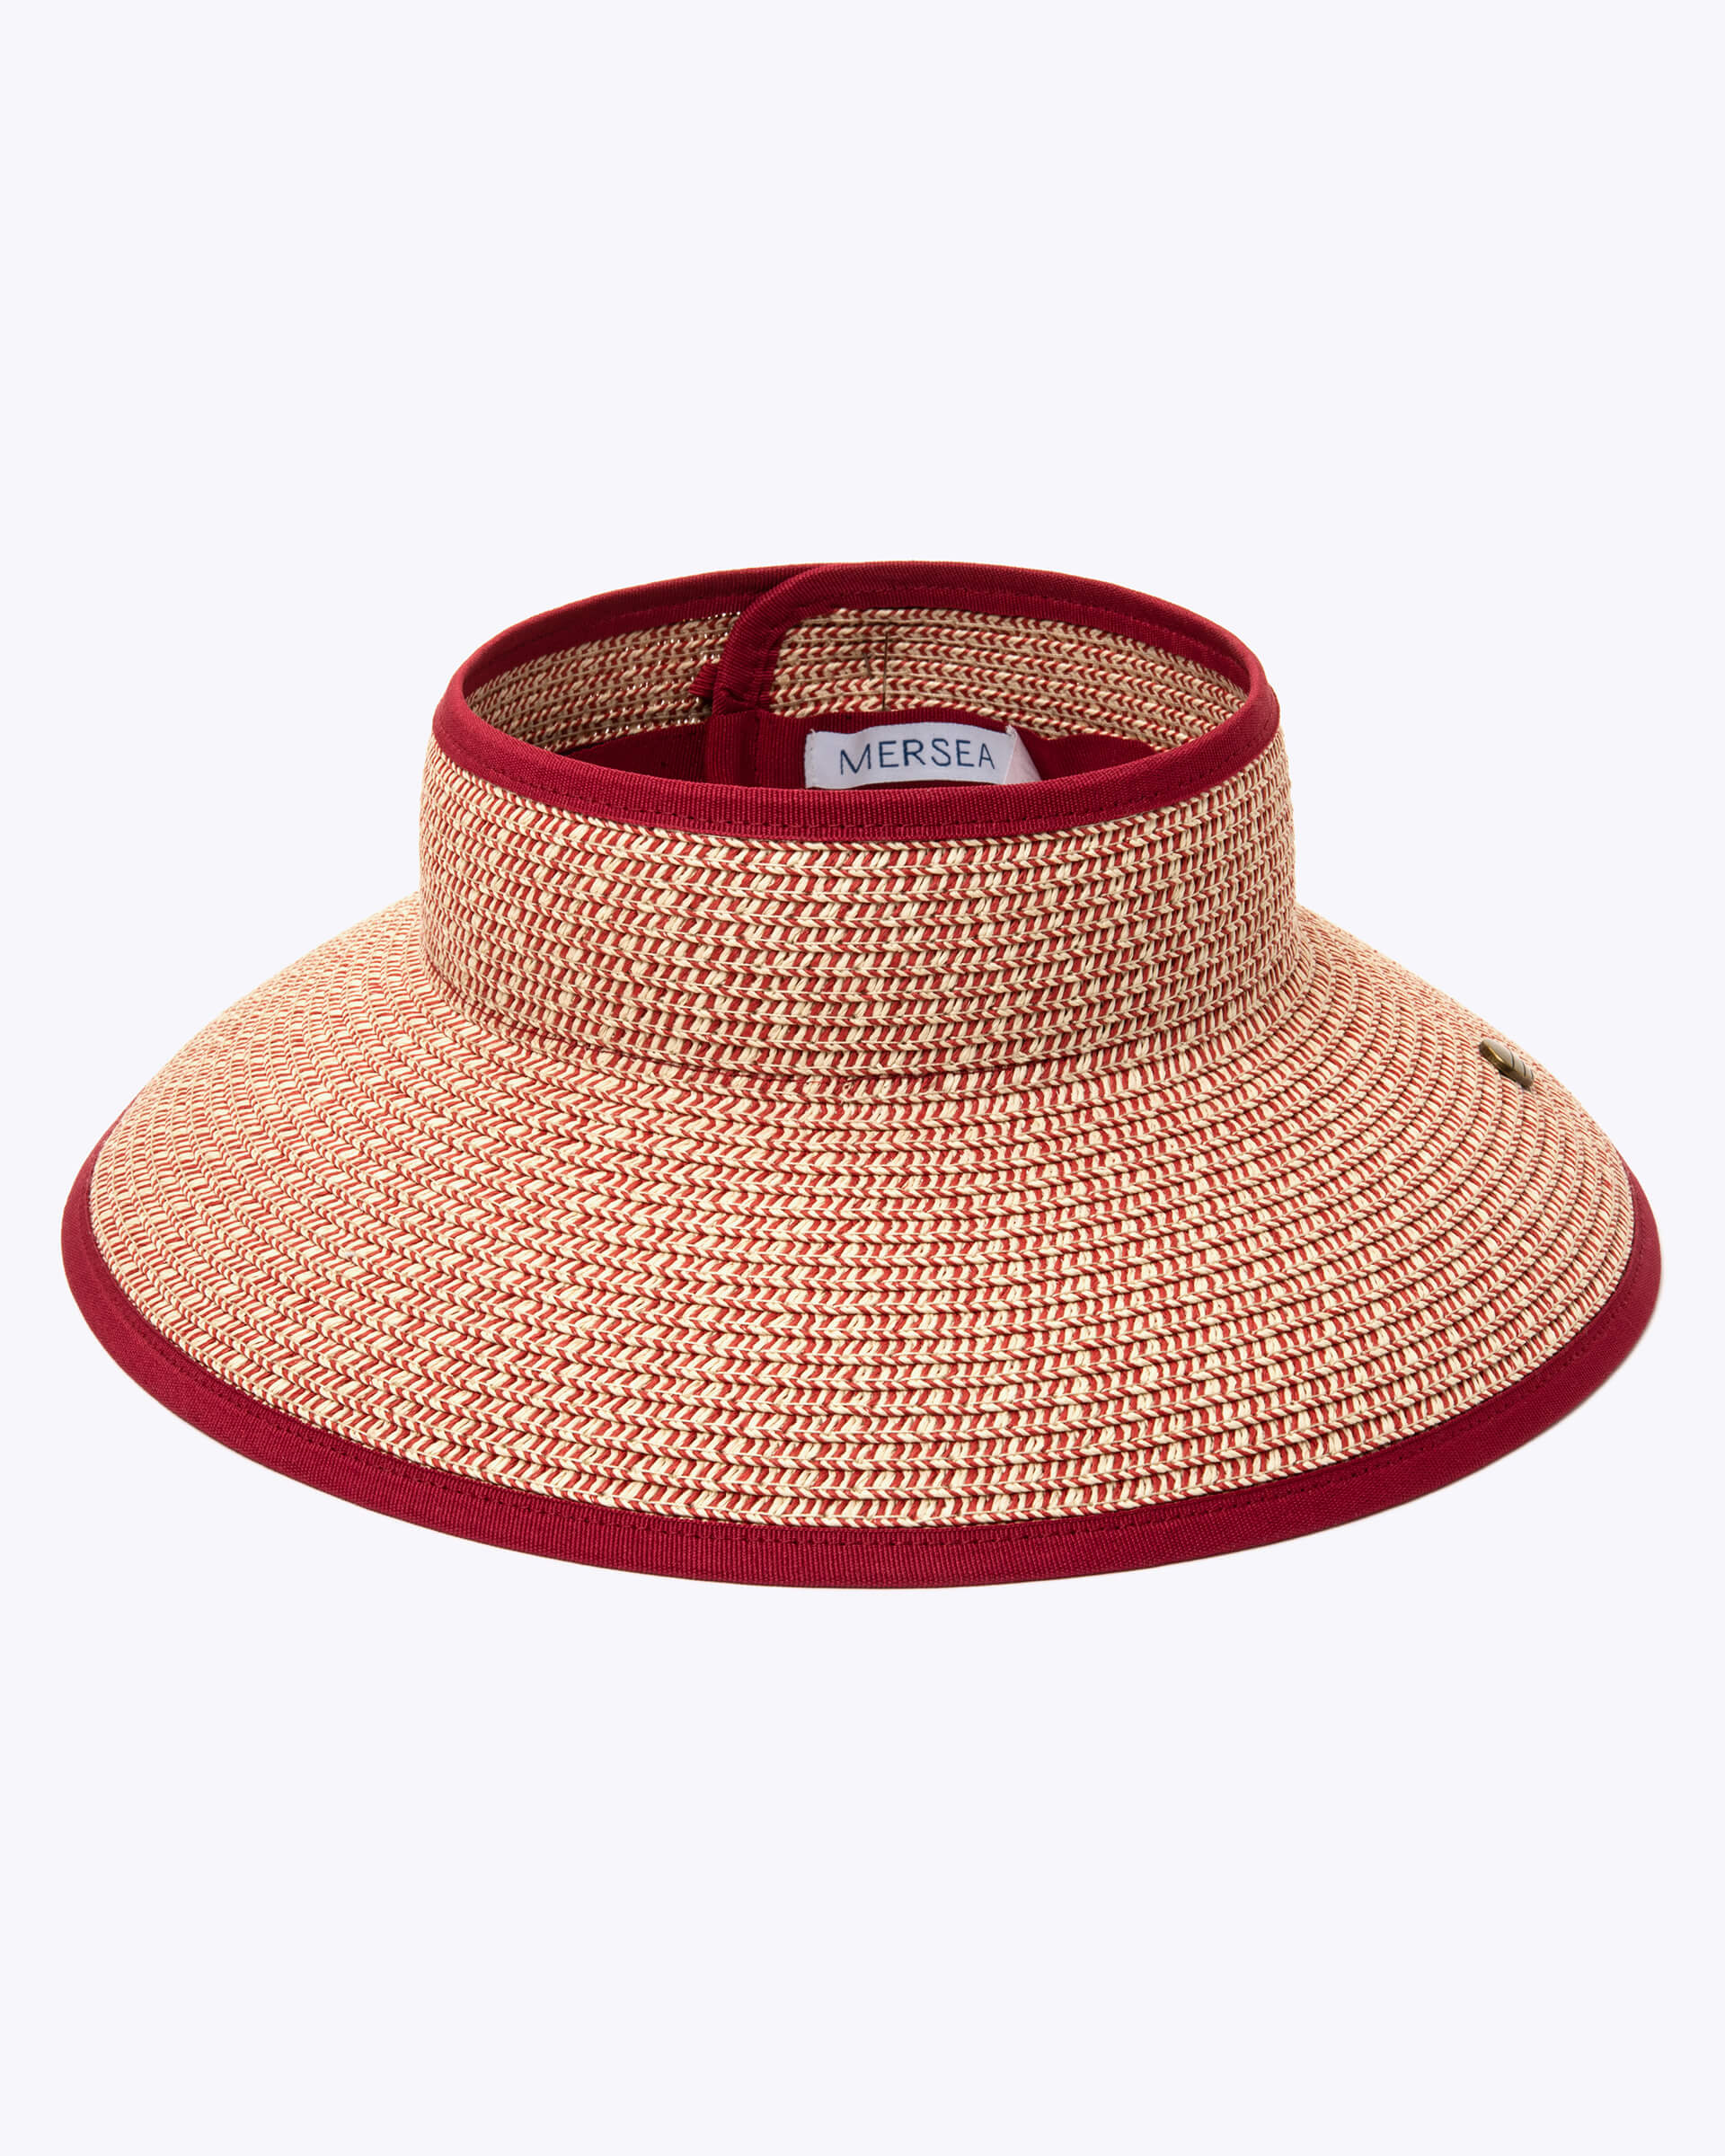 The Up-Cycled Louis Vuitton Rollable Packable Straw Visor